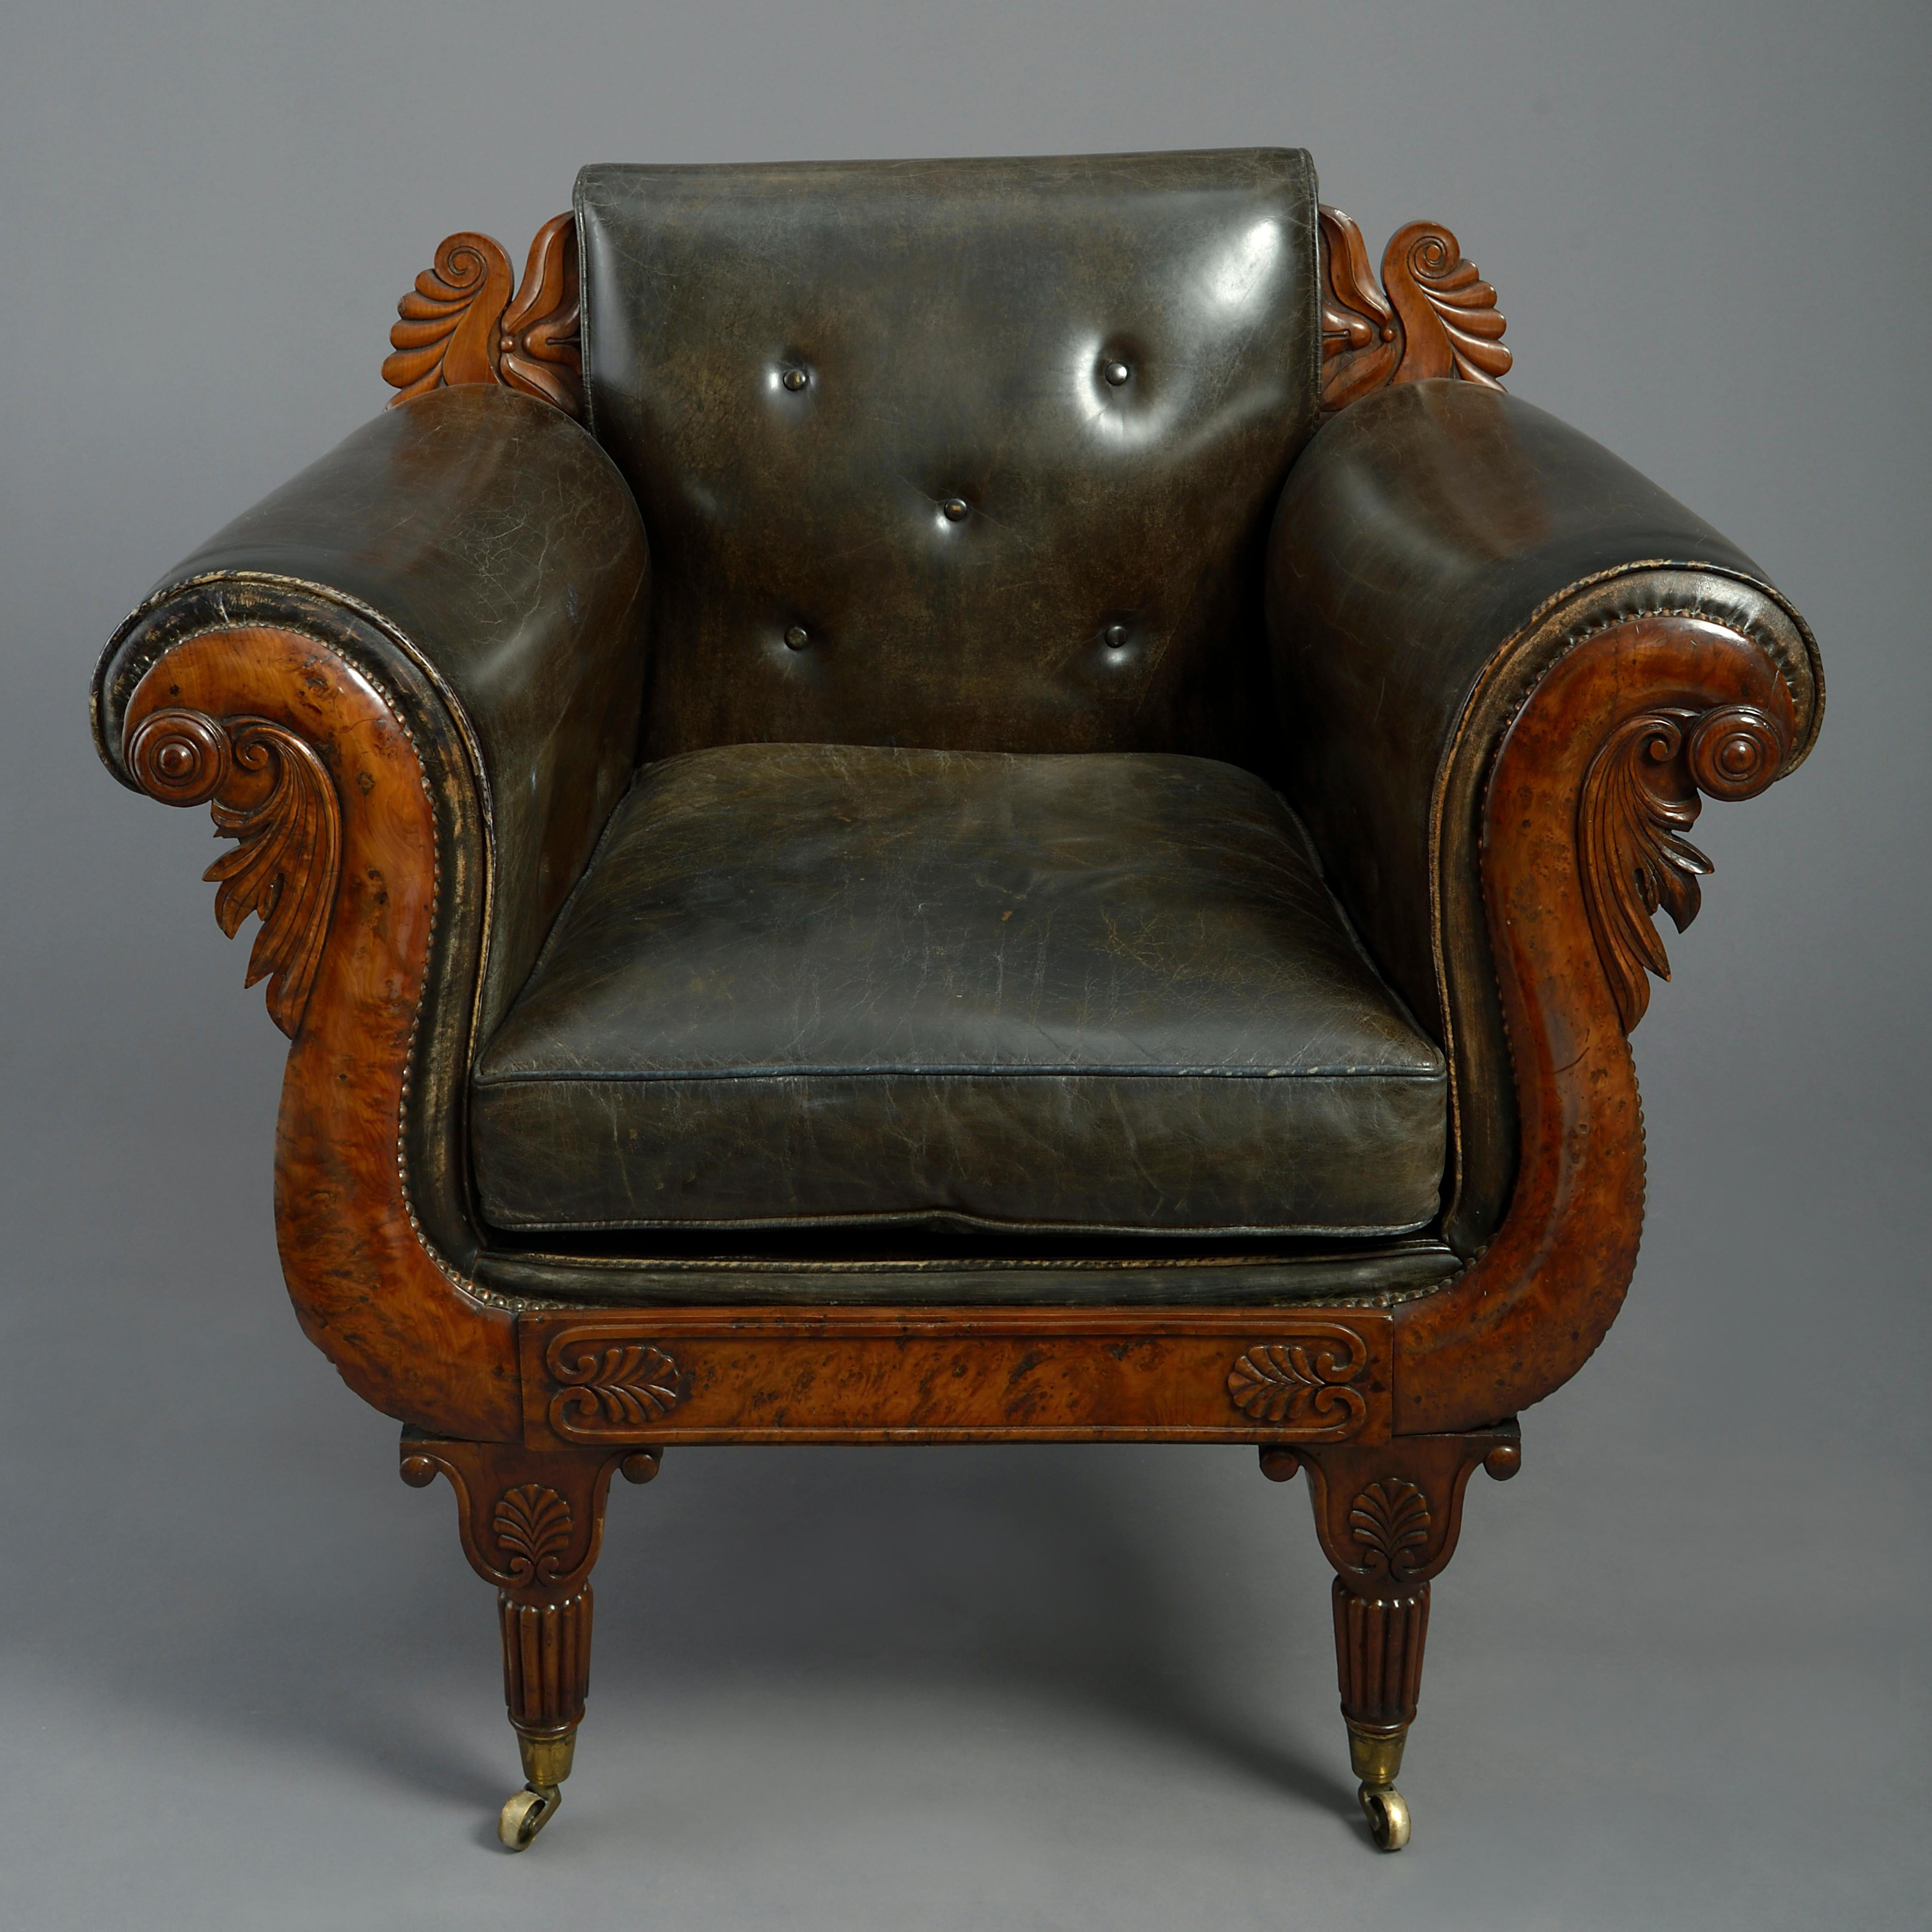 An unusual early nineteenth century Regency Period burr yew wood leather upholstered bergère armchair of generous proportions, the back flanked with carved acroteria, the scrolling arms with stylised acanthus upon a frame of anthemia and raised upon